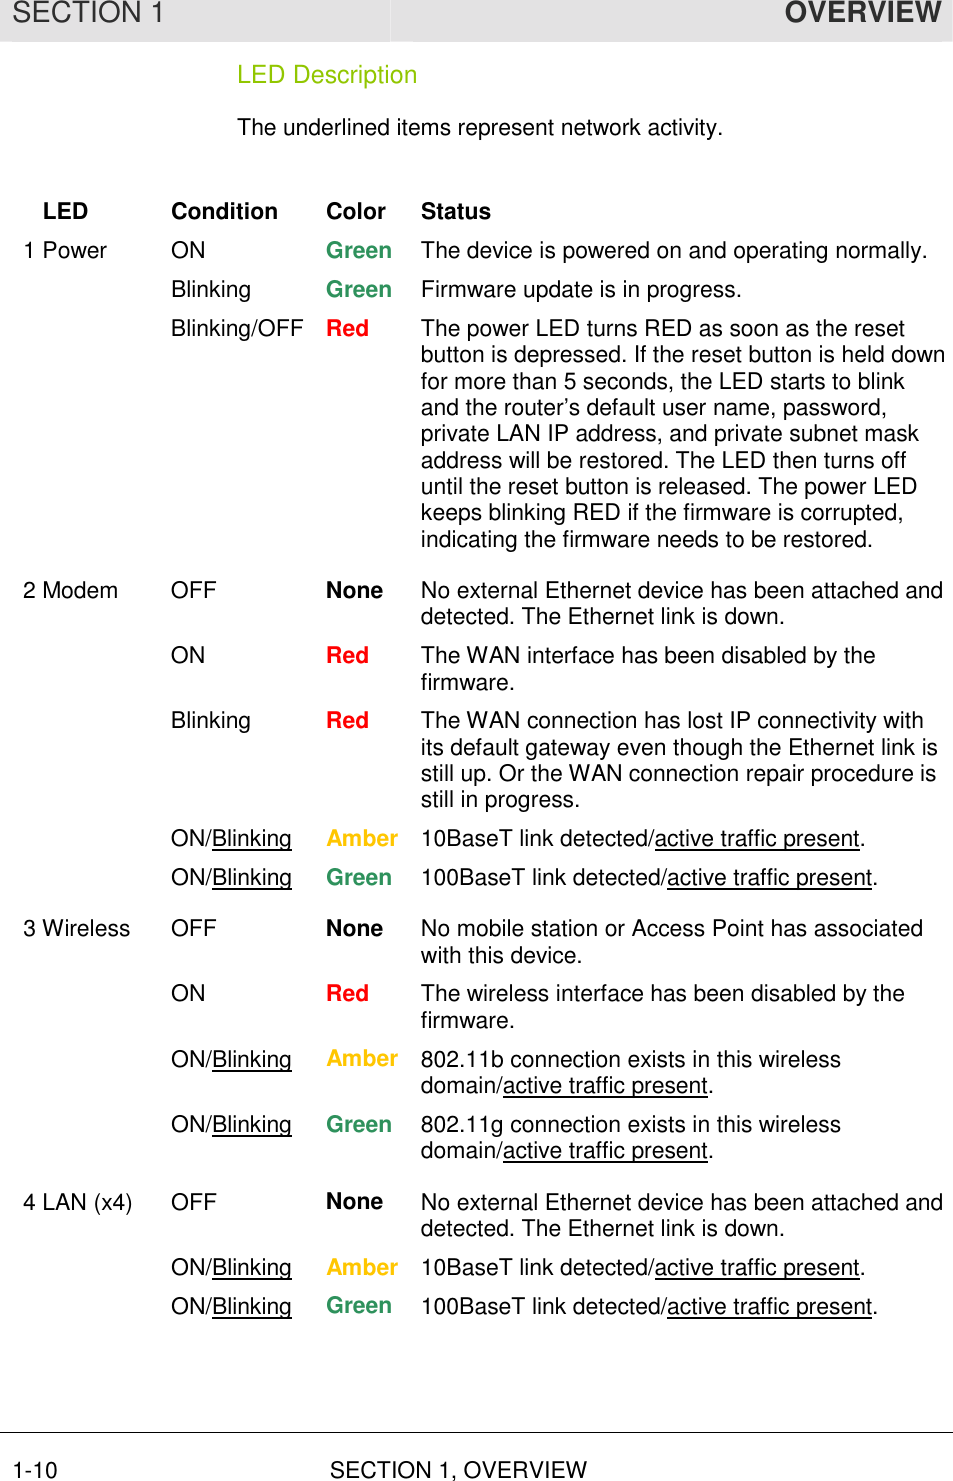 SECTION 1  OVERVIEW 1-10 SECTION 1, OVERVIEW  LED Description The underlined items represent network activity.     LED  Condition  Color  Status 1 Power  ON  Green  The device is powered on and operating normally.  Blinking Green  Firmware update is in progress.  Blinking/OFF Red  The power LED turns RED as soon as the reset button is depressed. If the reset button is held down for more than 5 seconds, the LED starts to blink and the router’s default user name, password, private LAN IP address, and private subnet mask address will be restored. The LED then turns off until the reset button is released. The power LED keeps blinking RED if the firmware is corrupted, indicating the firmware needs to be restored. 2 Modem  OFF  None  No external Ethernet device has been attached and detected. The Ethernet link is down.  ON Red  The WAN interface has been disabled by the firmware.  Blinking Red  The WAN connection has lost IP connectivity with its default gateway even though the Ethernet link is still up. Or the WAN connection repair procedure is still in progress.  ON/Blinking Amber 10BaseT link detected/active traffic present.      ON/Blinking Green  100BaseT link detected/active traffic present. 3 Wireless  OFF  None  No mobile station or Access Point has associated with this device.  ON  Red  The wireless interface has been disabled by the firmware.  ON/Blinking Amber 802.11b connection exists in this wireless domain/active traffic present.  ON/Blinking Green  802.11g connection exists in this wireless domain/active traffic present. 4 LAN (x4)  OFF  None  No external Ethernet device has been attached and detected. The Ethernet link is down.  ON/Blinking Amber 10BaseT link detected/active traffic present.  ON/Blinking Green  100BaseT link detected/active traffic present.  